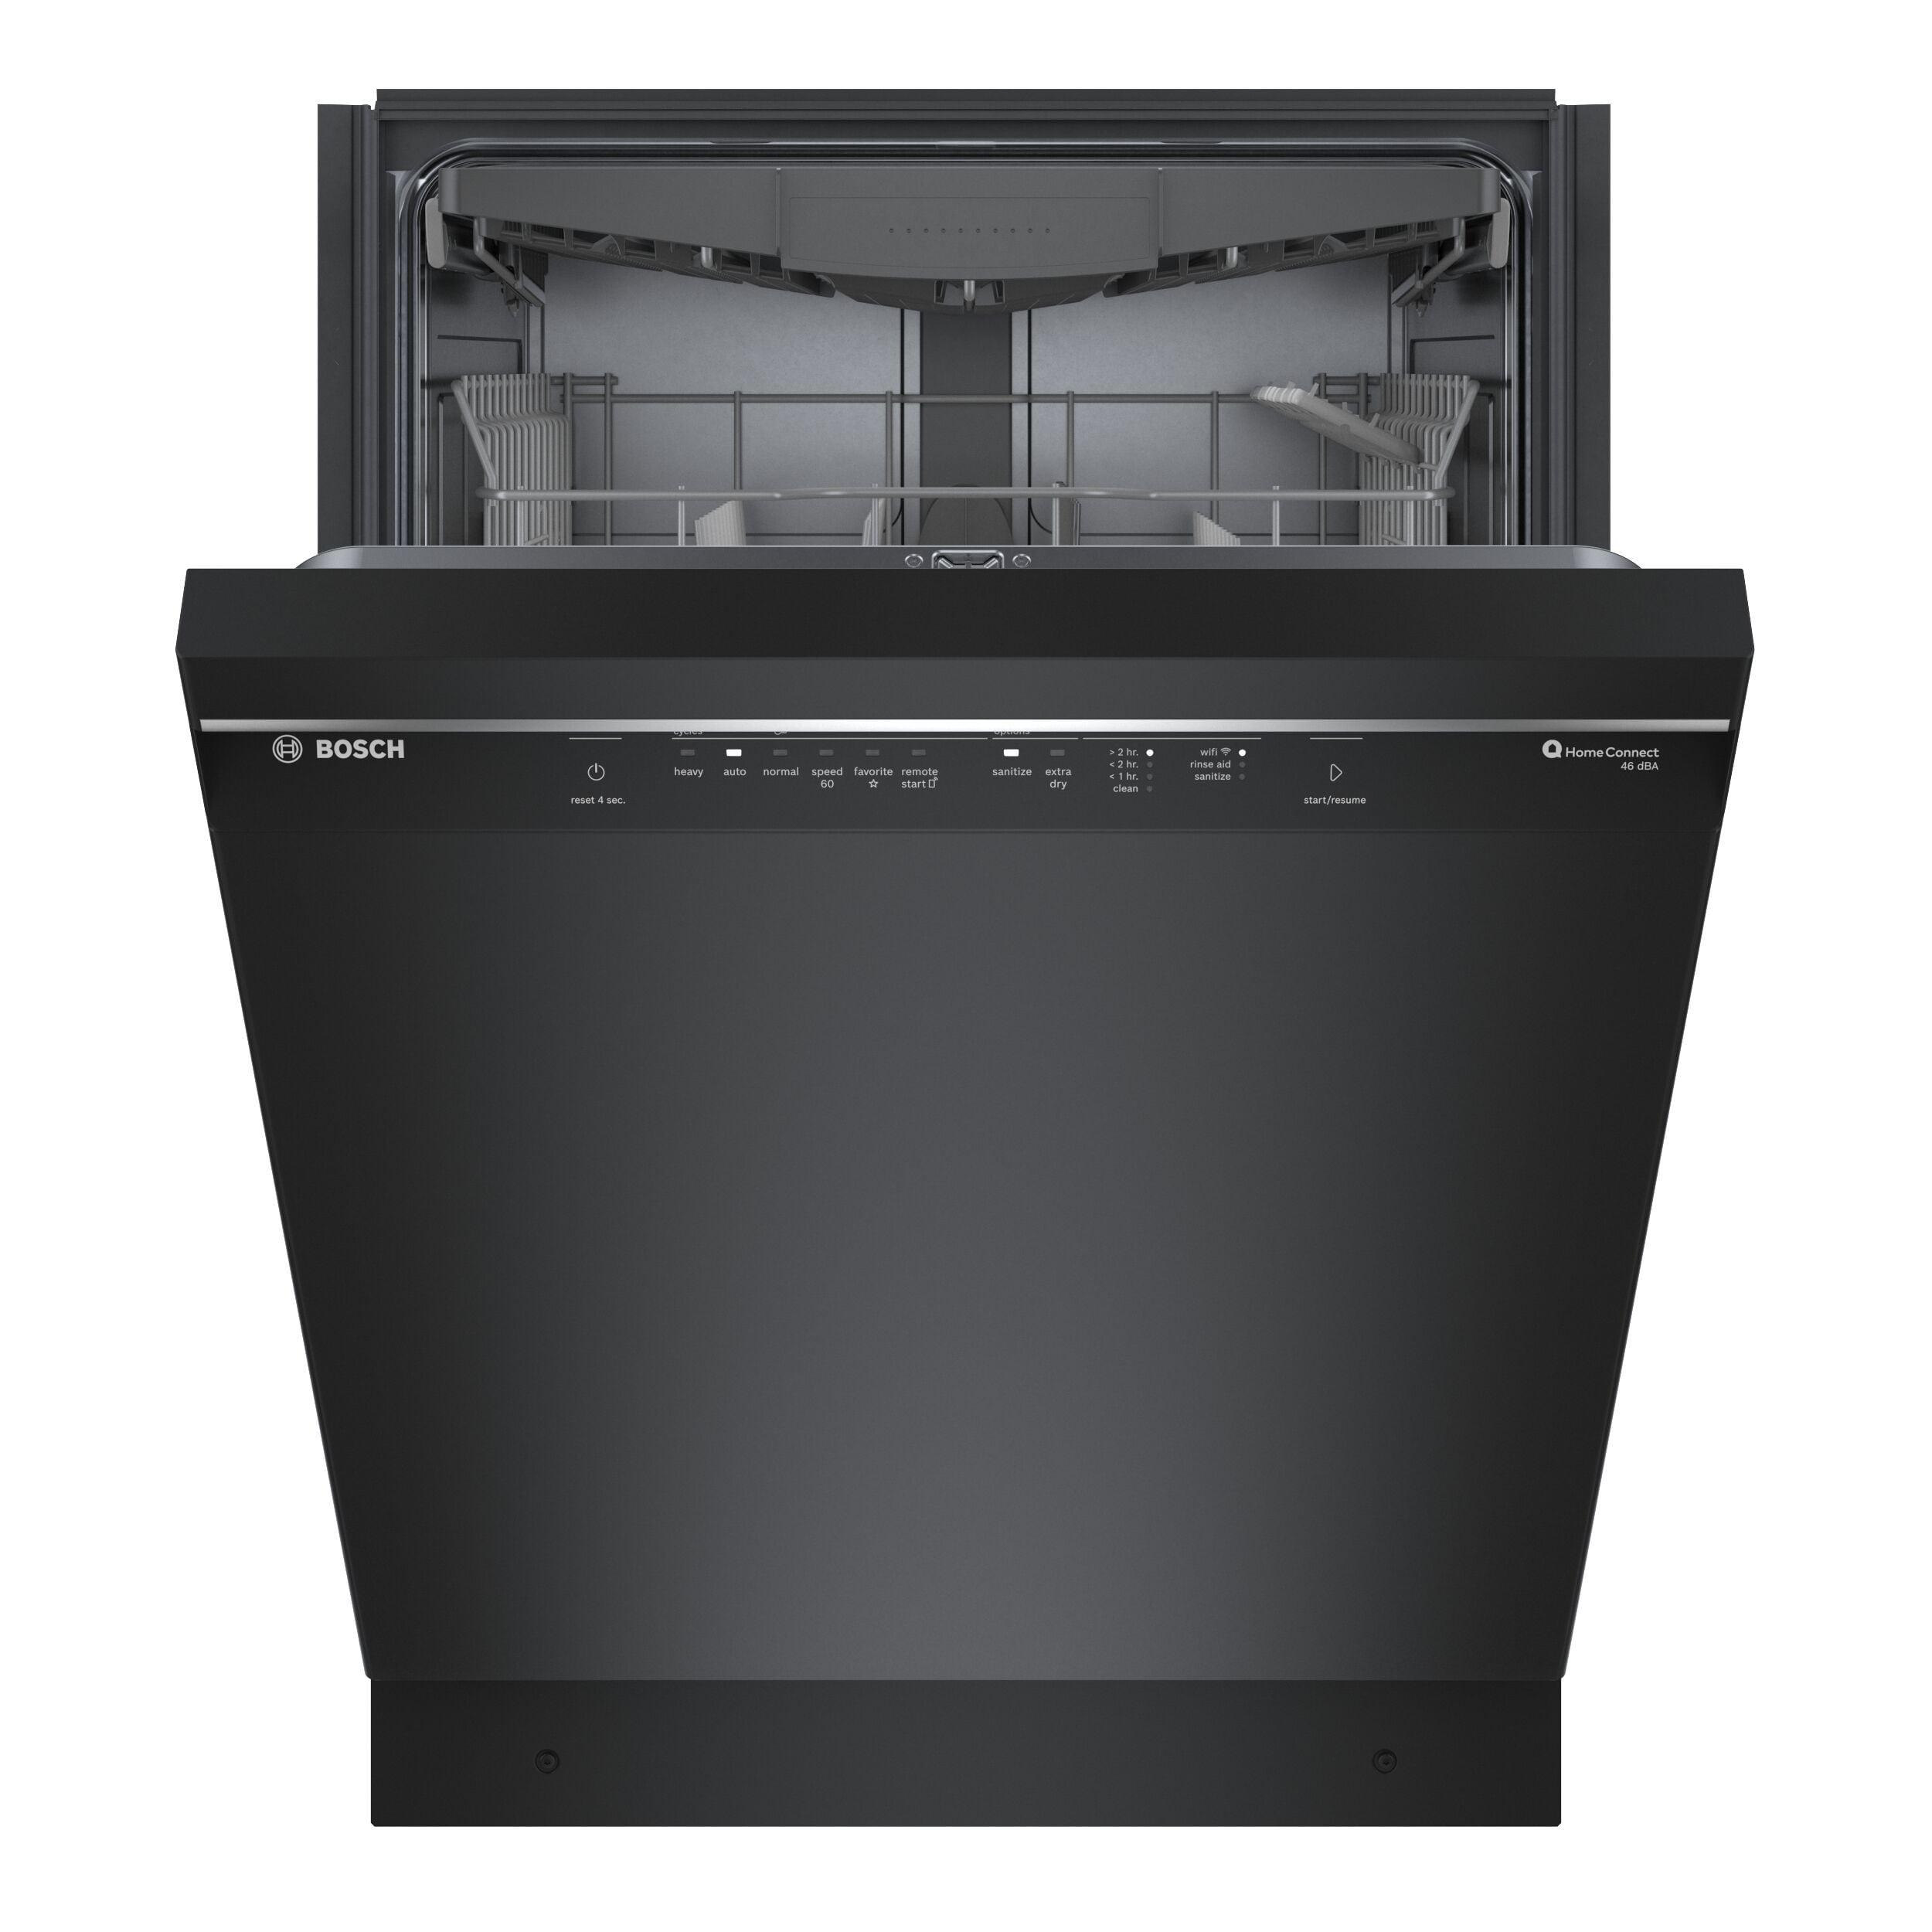 Are Confused About Bosch 300 Series Dishwashers Models? Check This